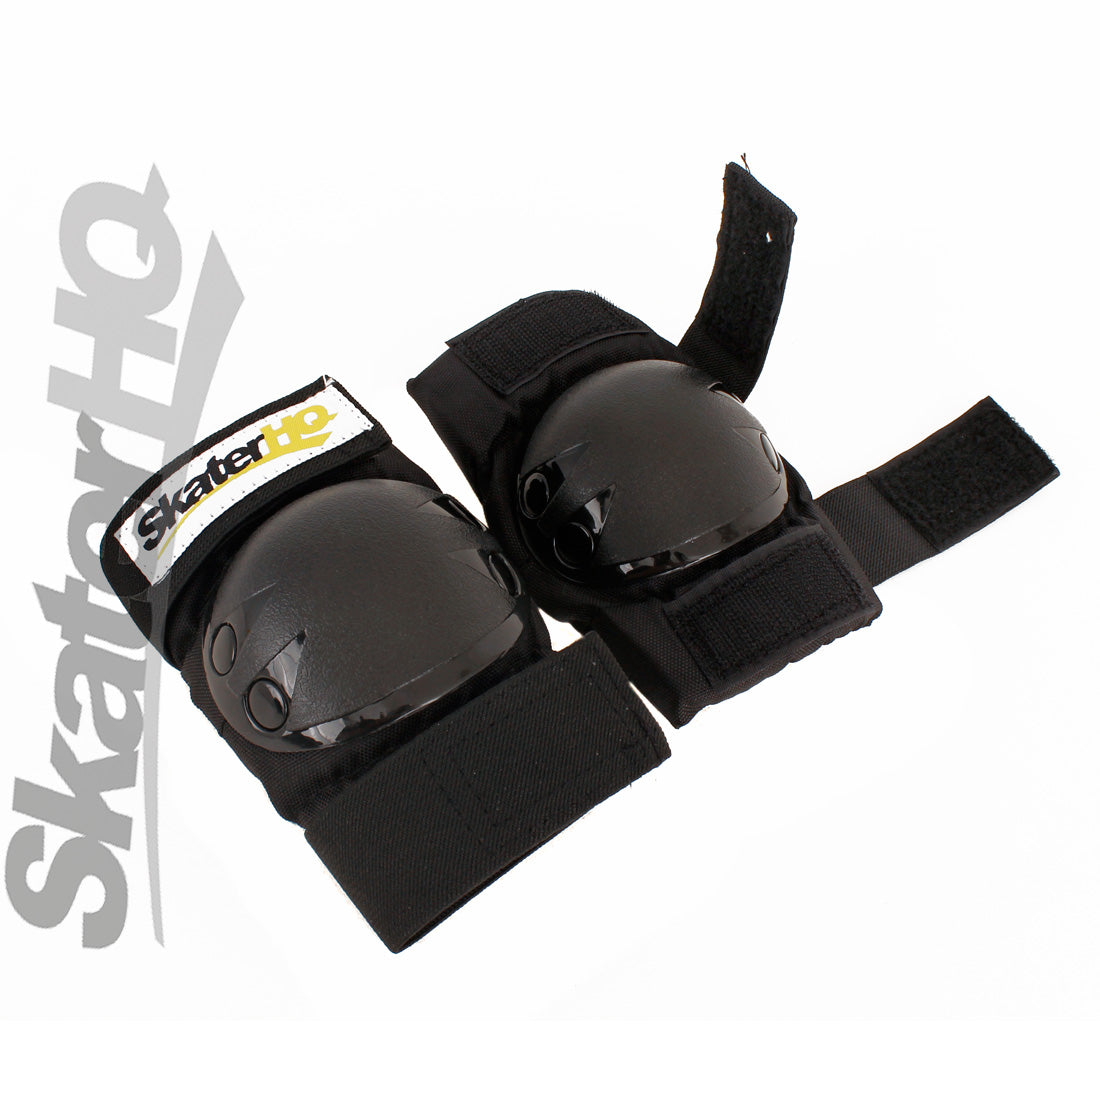 Skater HQ Elbow Pads - Grommet Protective Gear